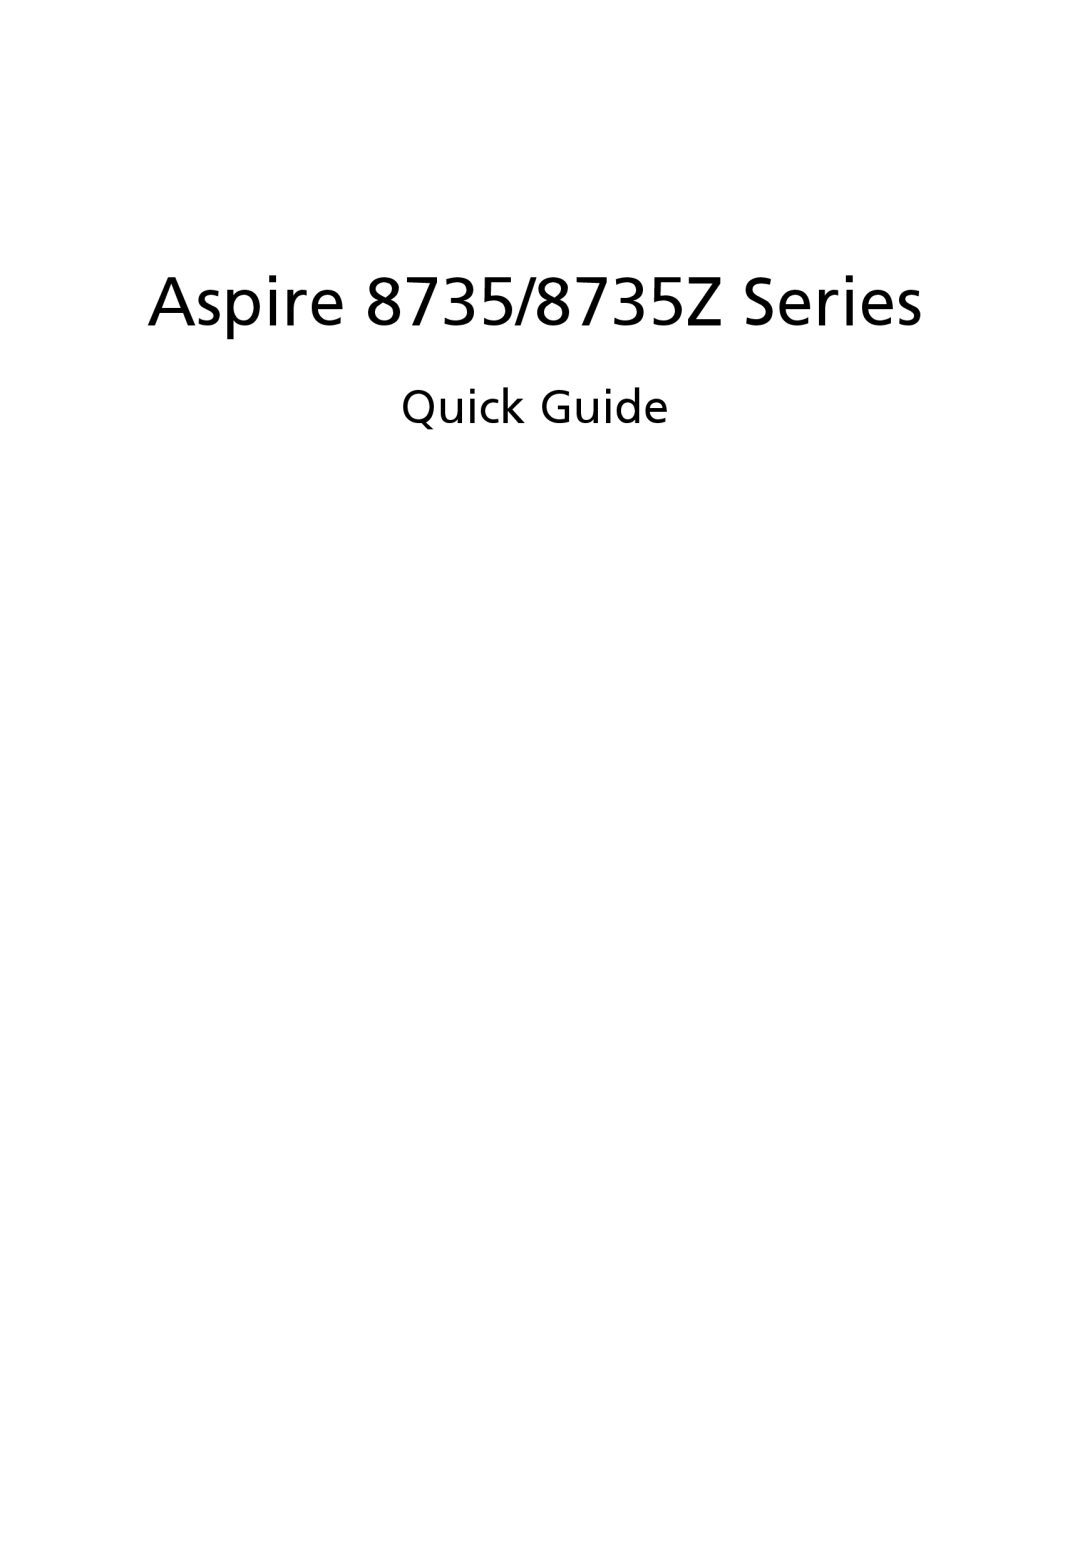 Acer manual Quick Guide, Aspire 8735/8735Z Series 